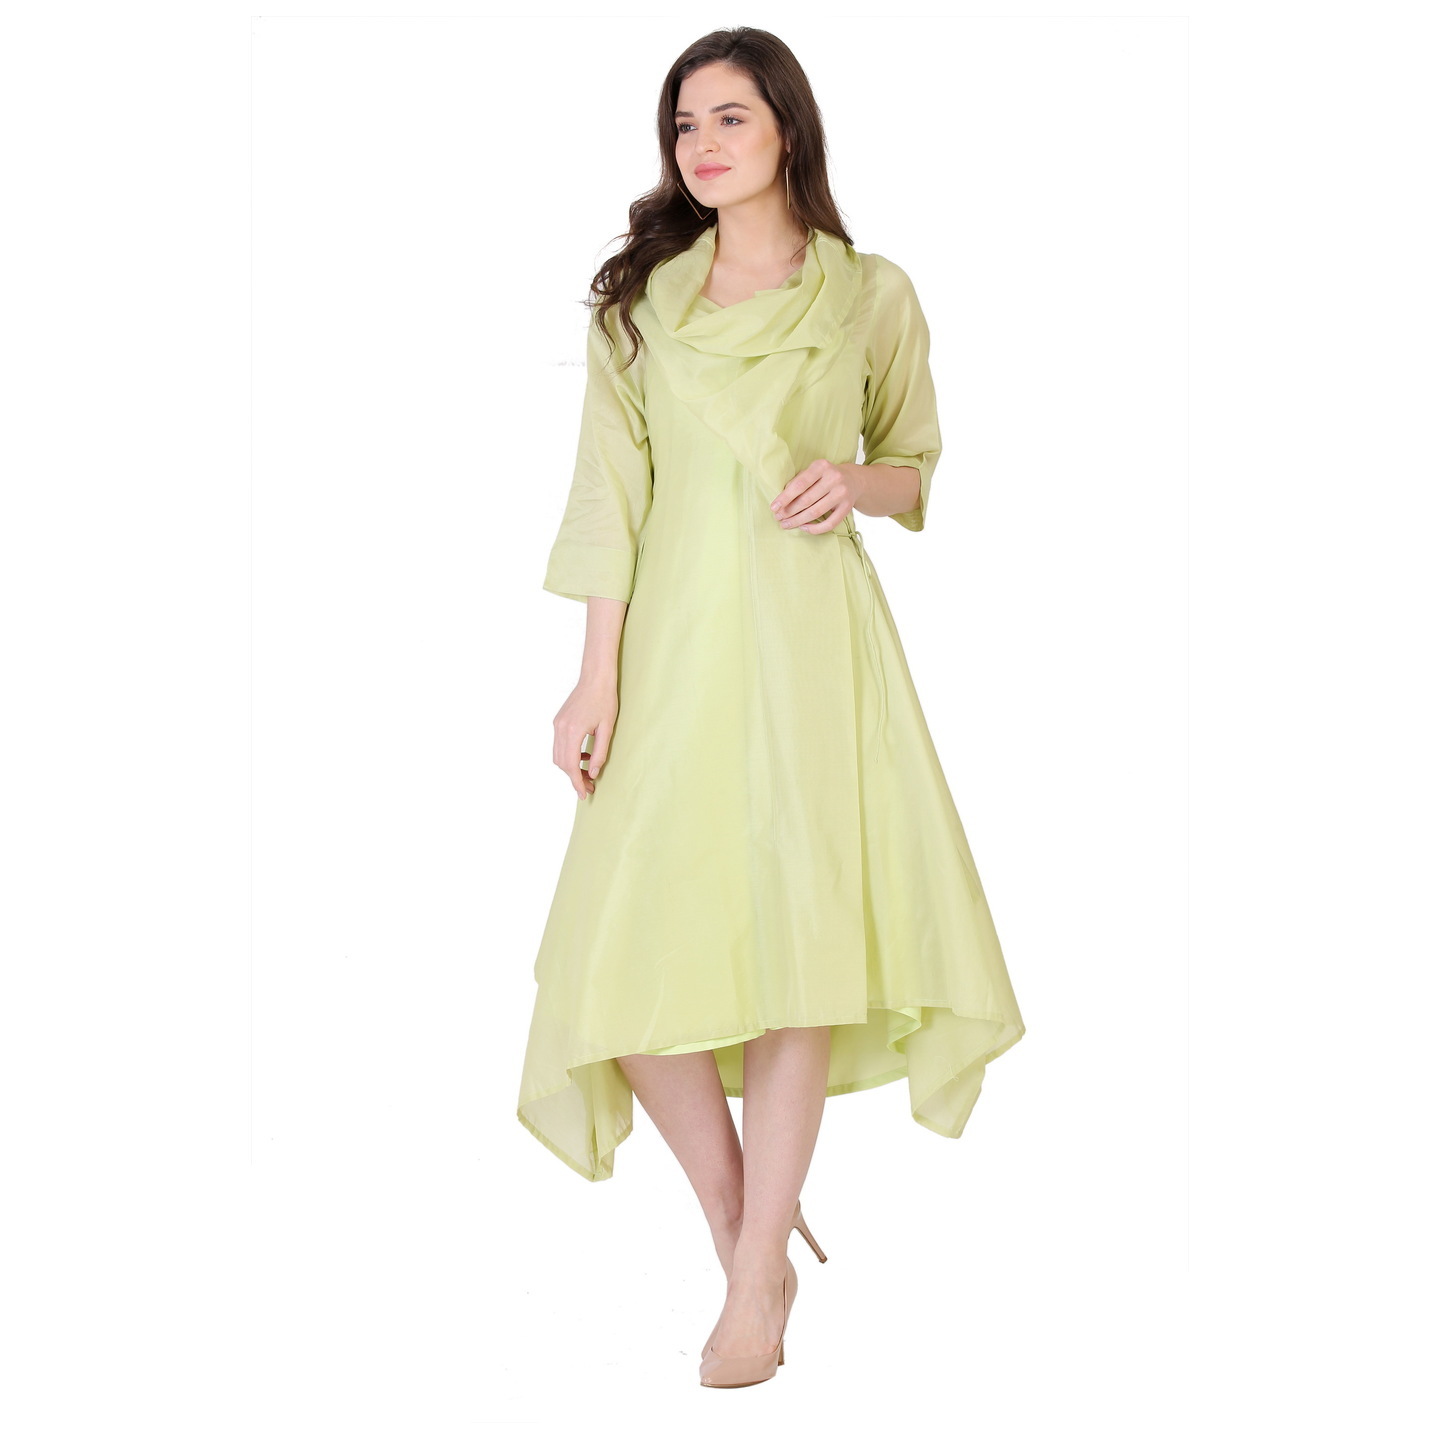 Soothing Apple-Green Calf-length Cowl-Neck dress RMS748